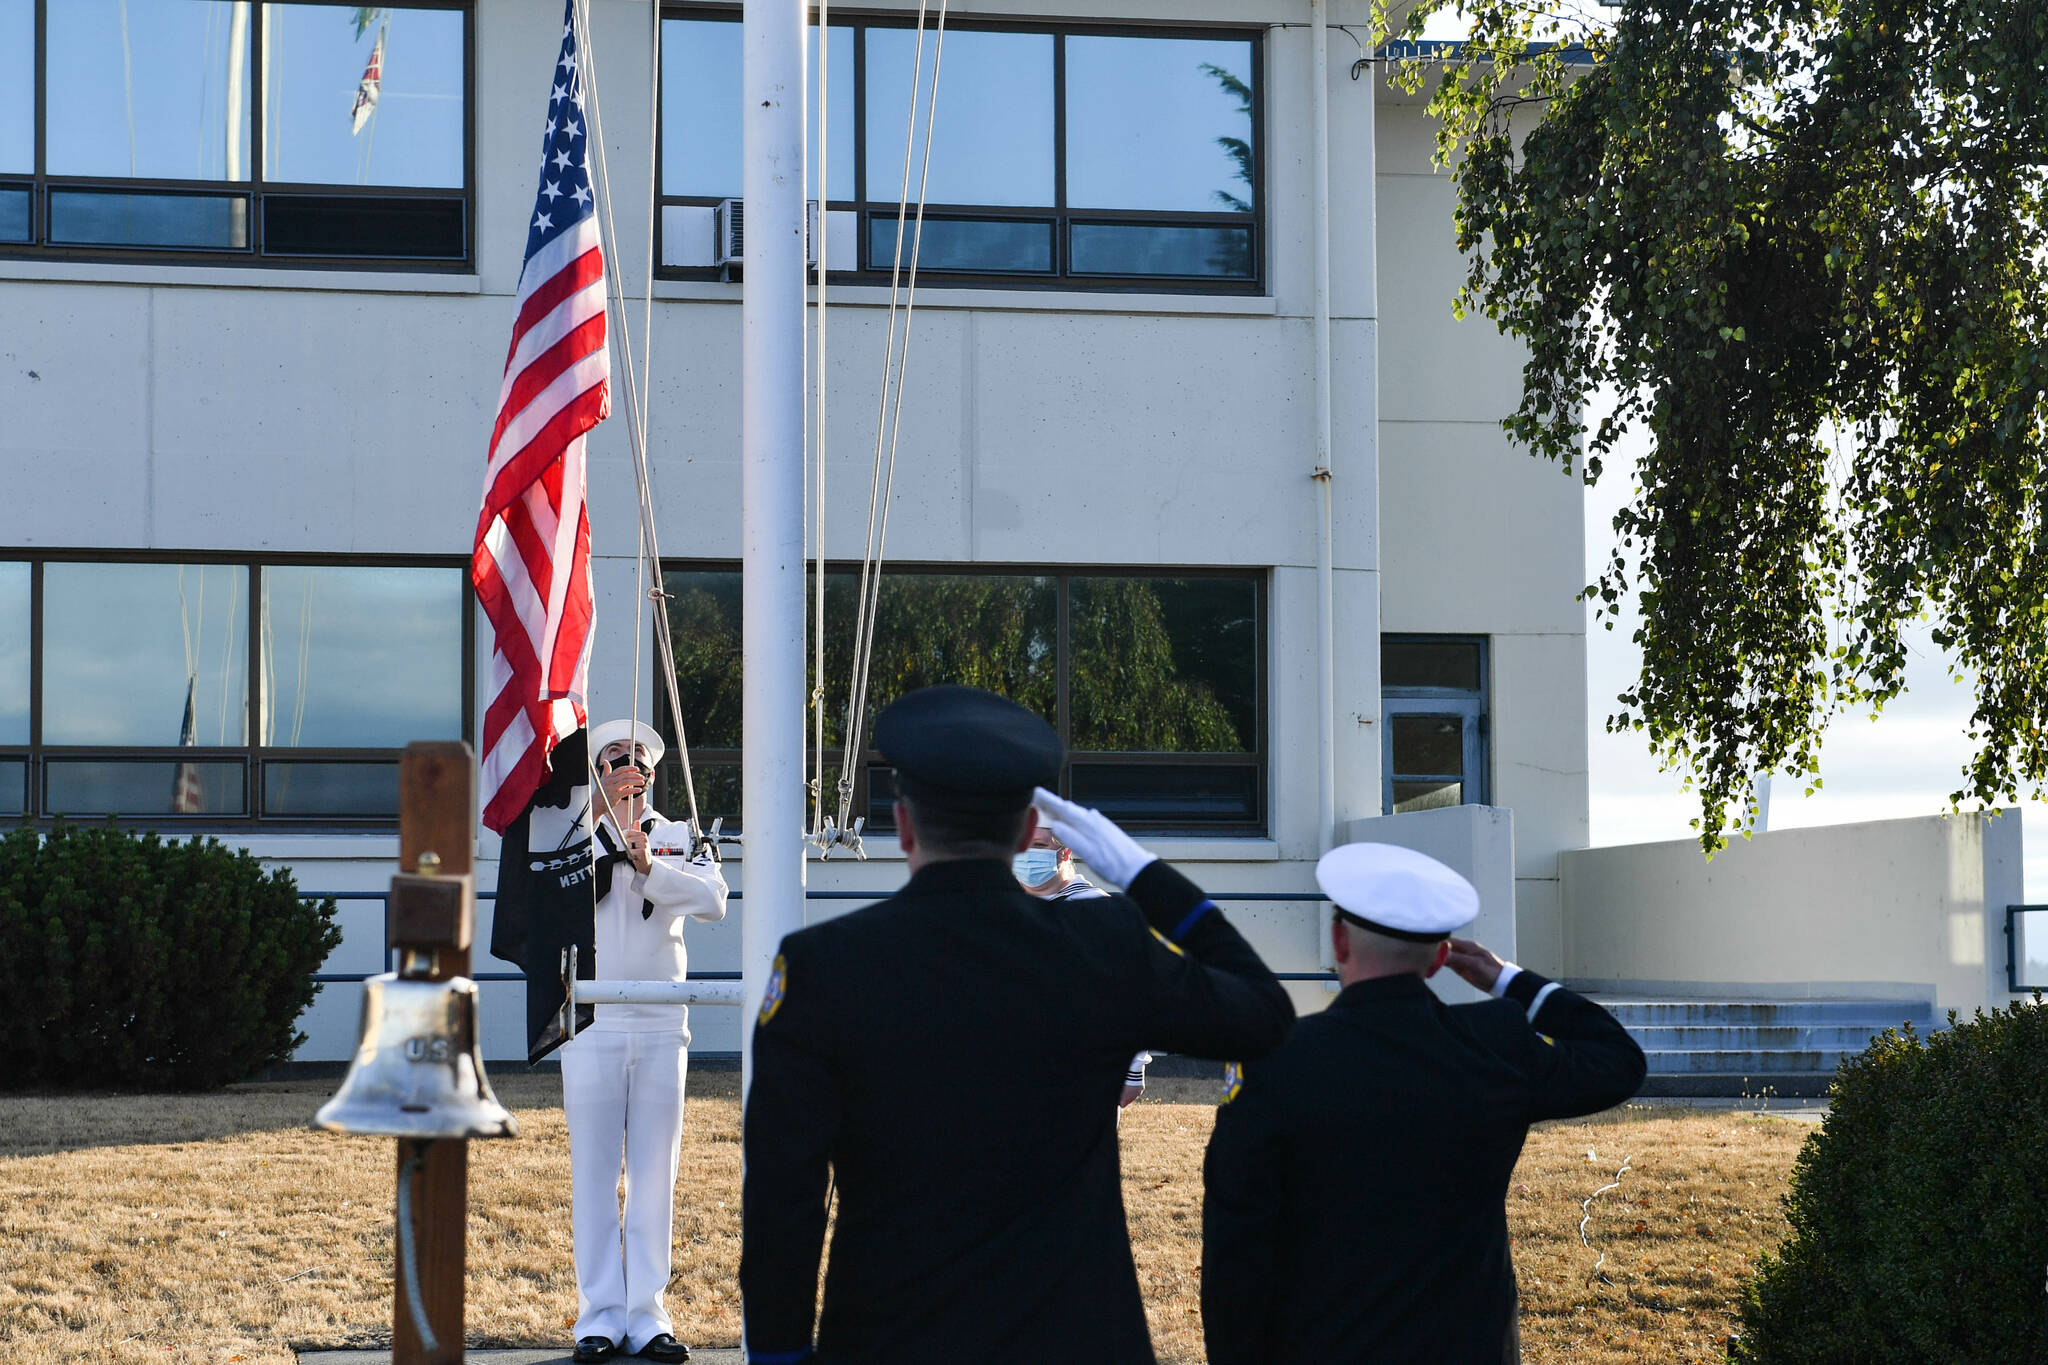 Navy photo by Mass Communications Specialist Second Class (MC2) Aranza Valdez
Almost 200 people attended NAS Whidbey Island’s ceremony Sept. 10 to remember the 9/11 terrorist attacks 20 years ago.